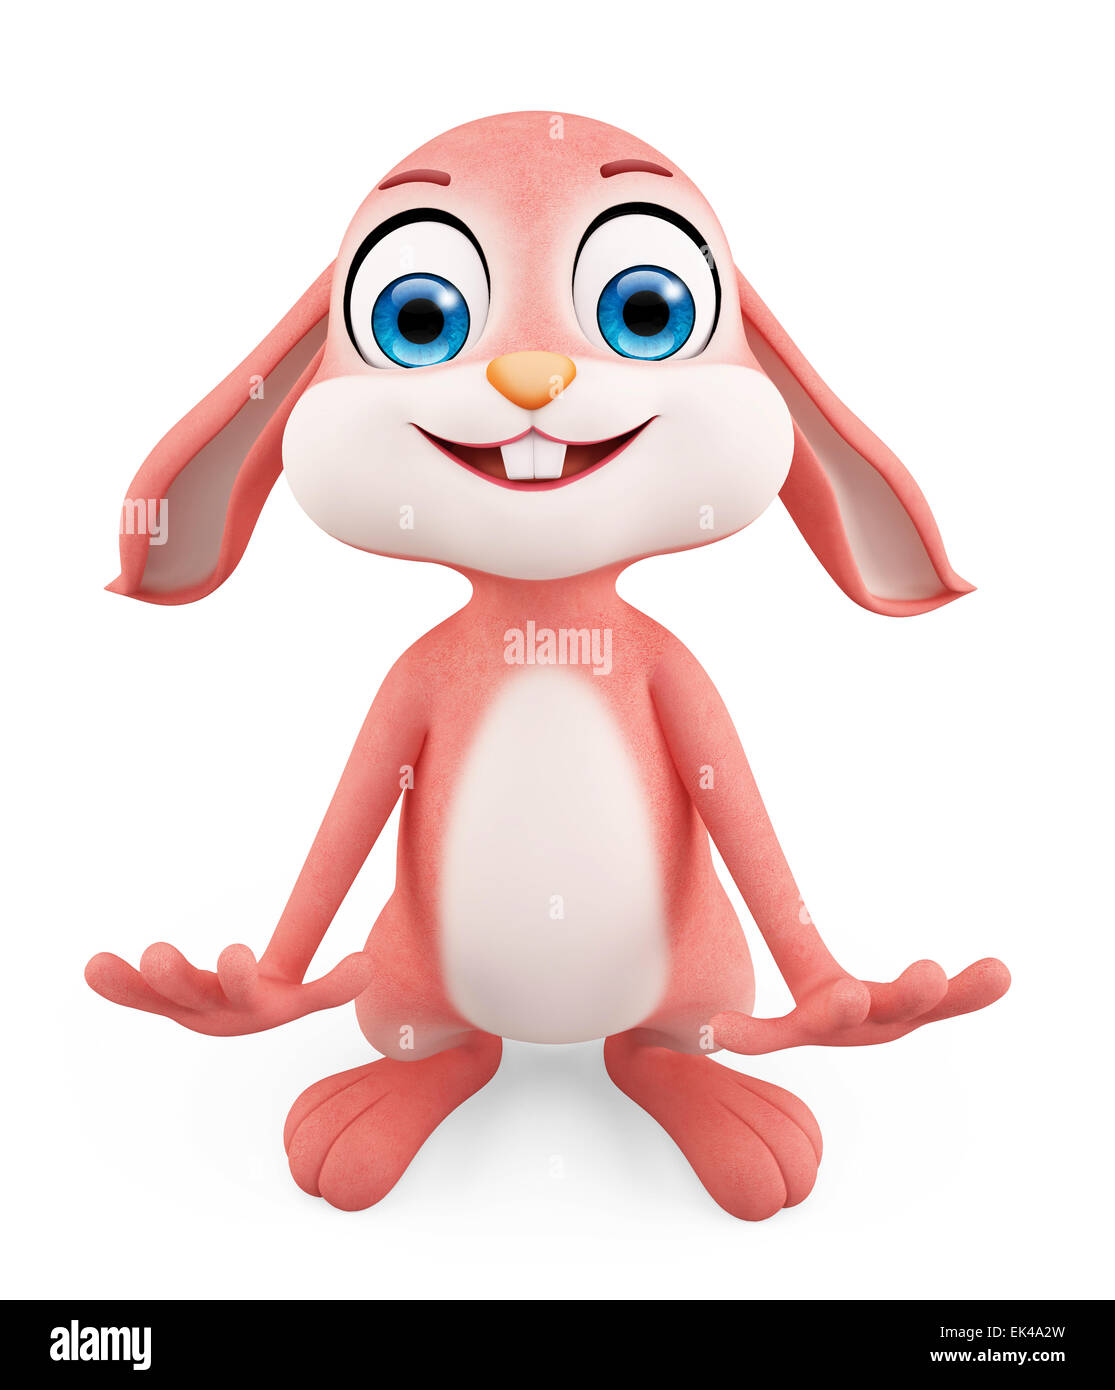 3d illustration of Easter Bunny with funny pose Stock Photo